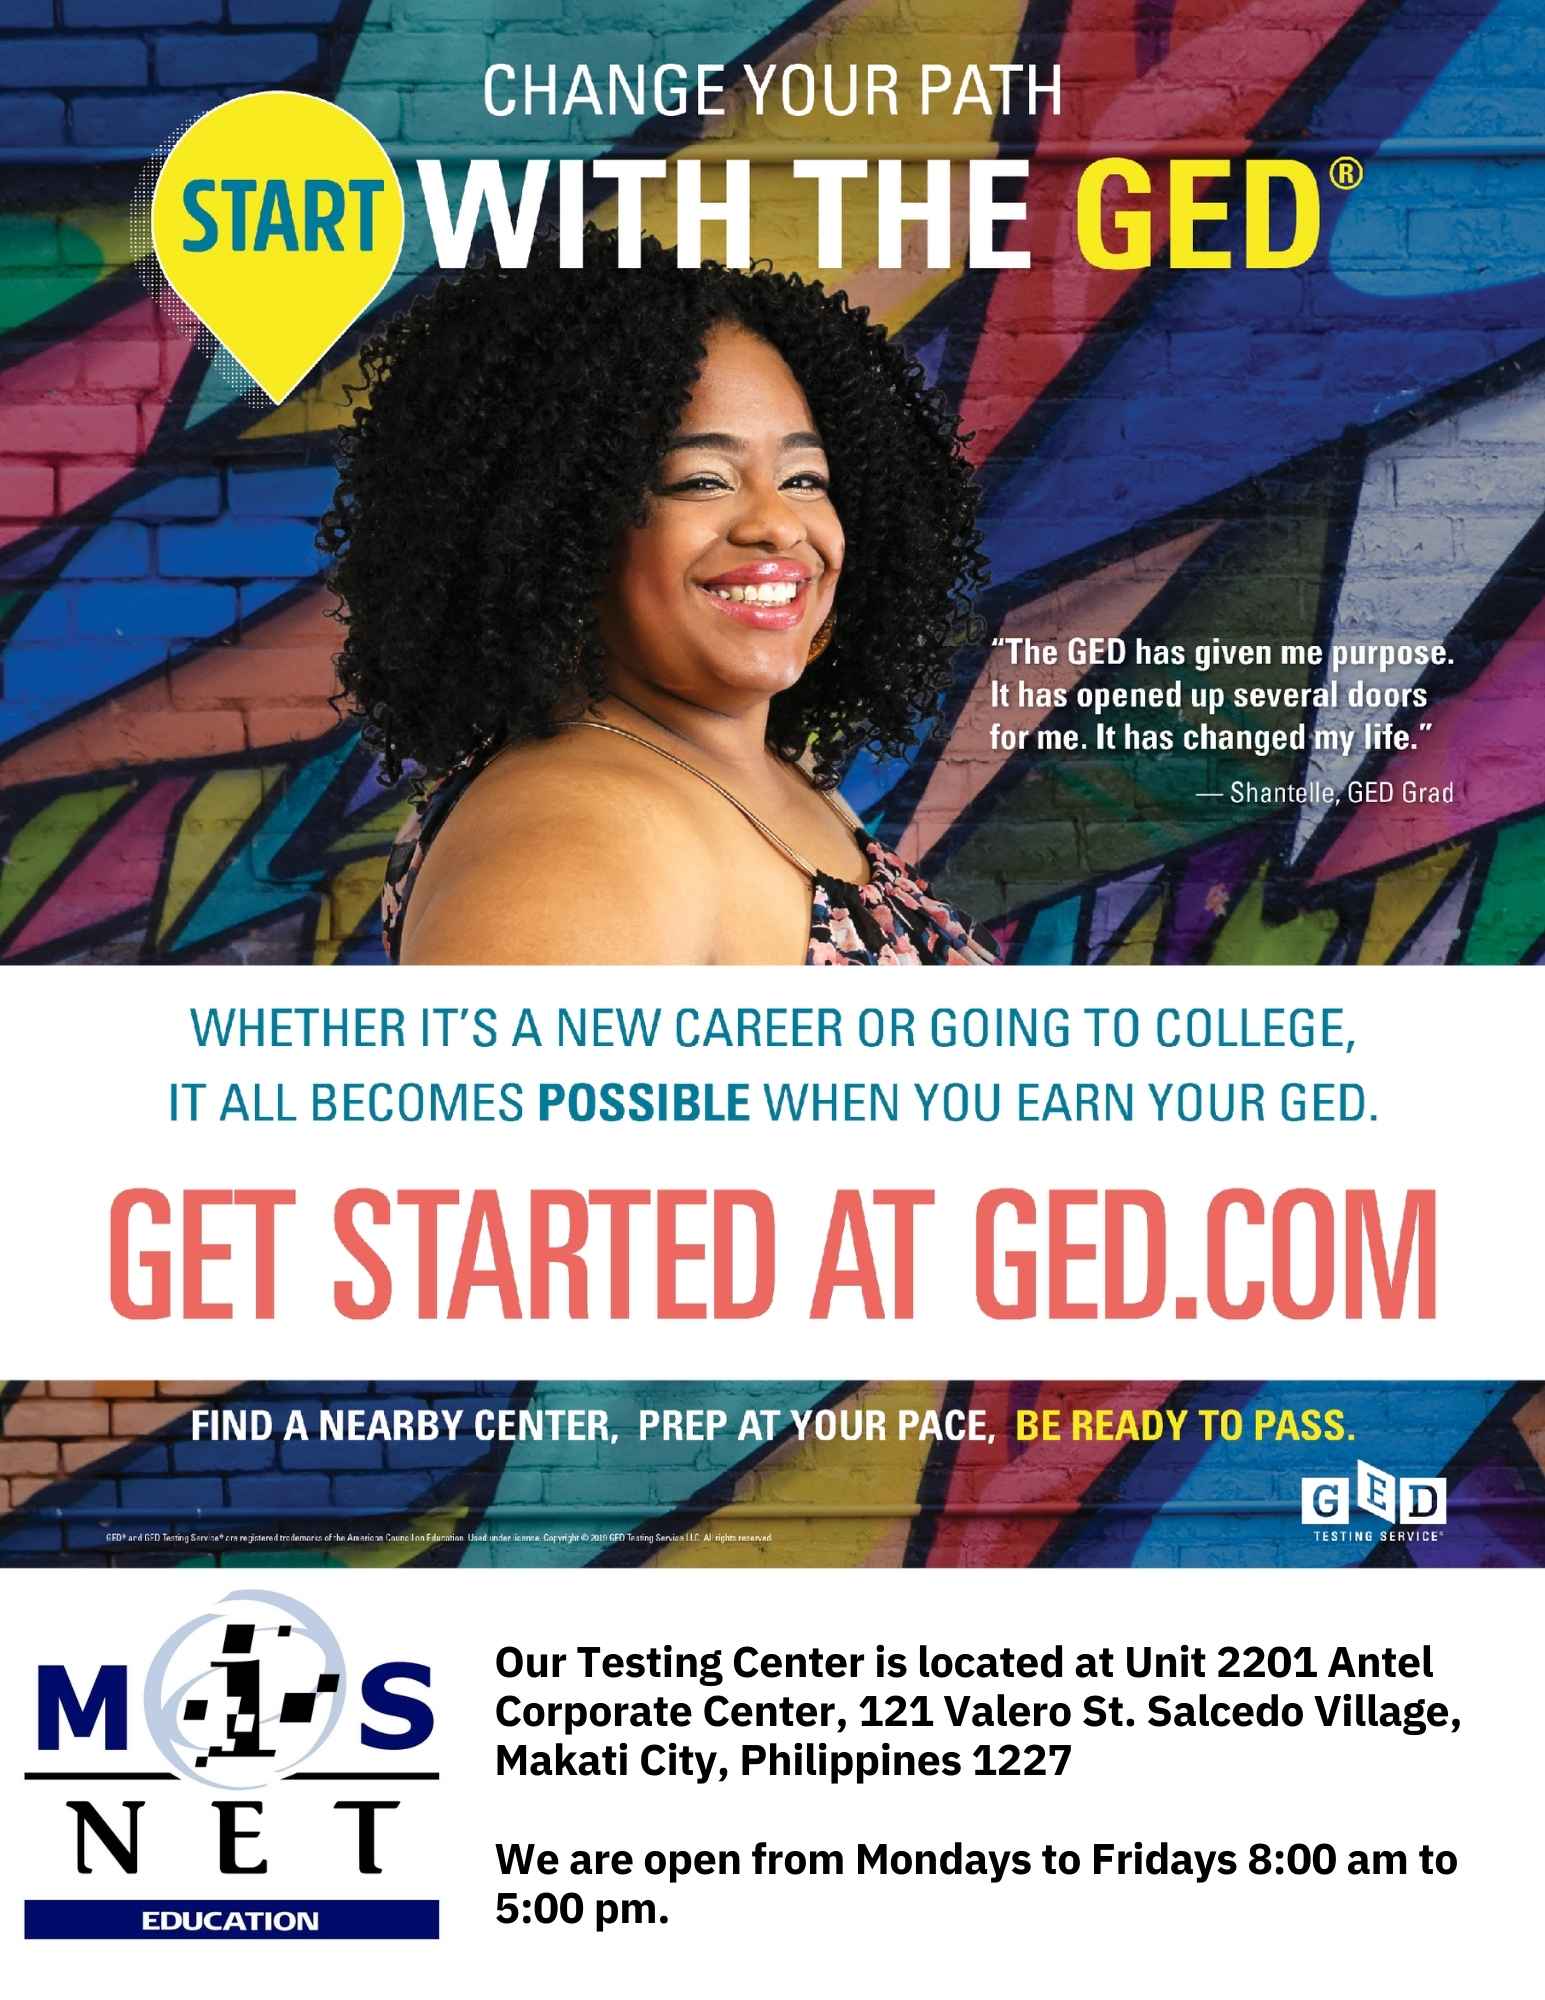 Change Your Path: Start with the GED